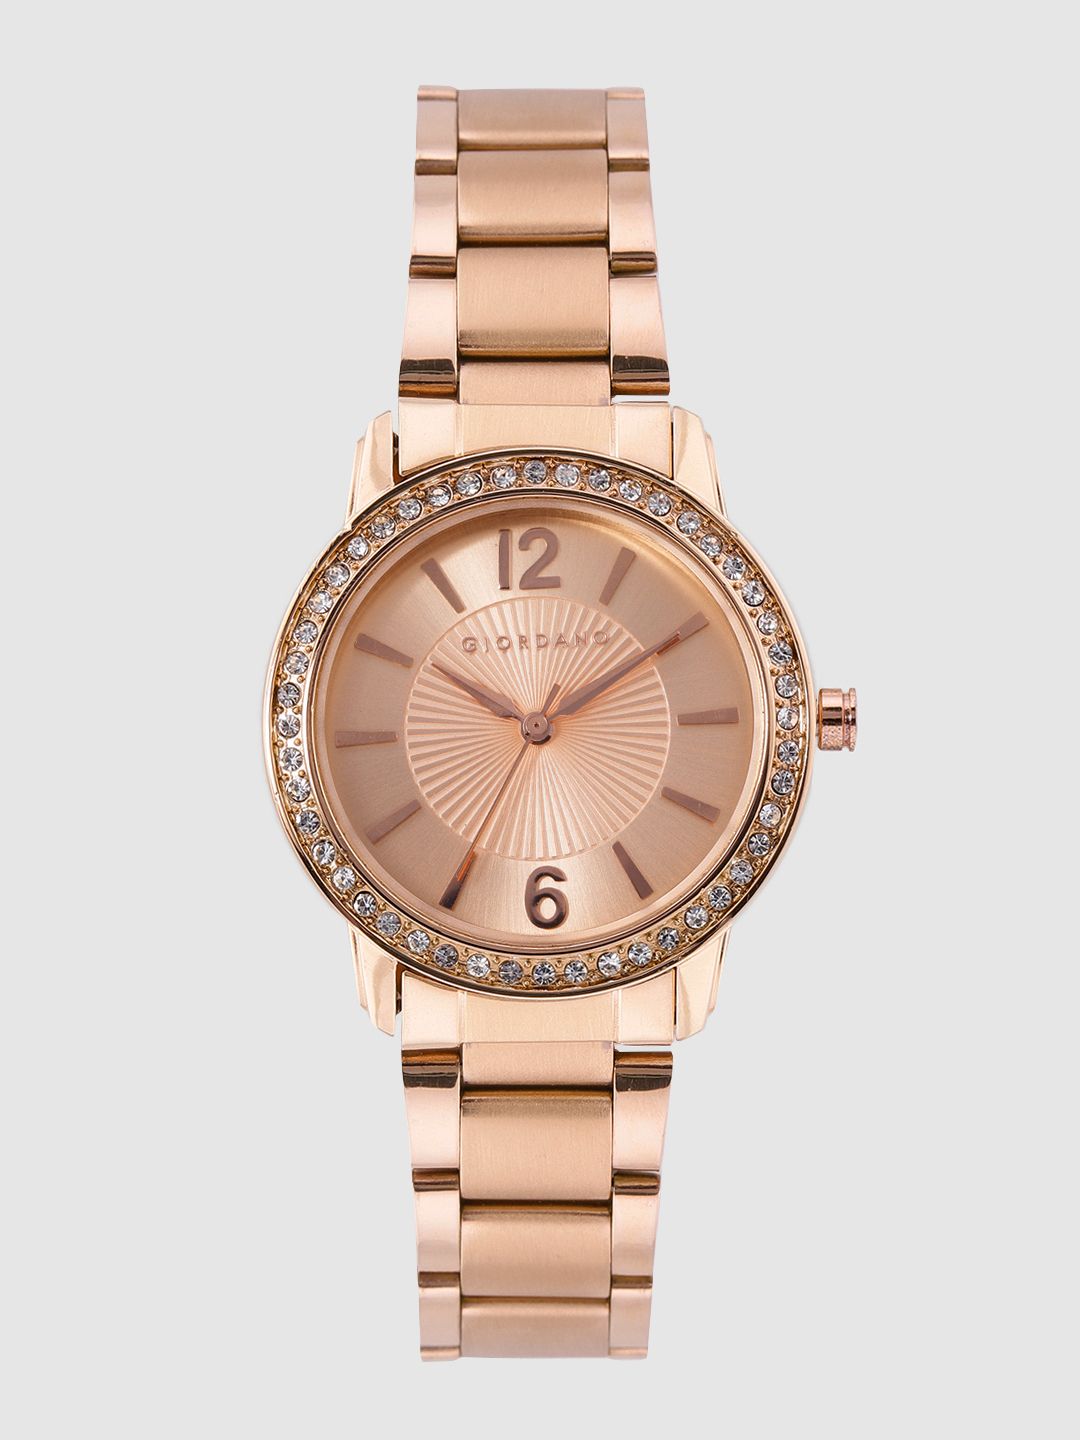 GIORDANO Women Rose Gold Analogue Watch GD-4010 Price in India